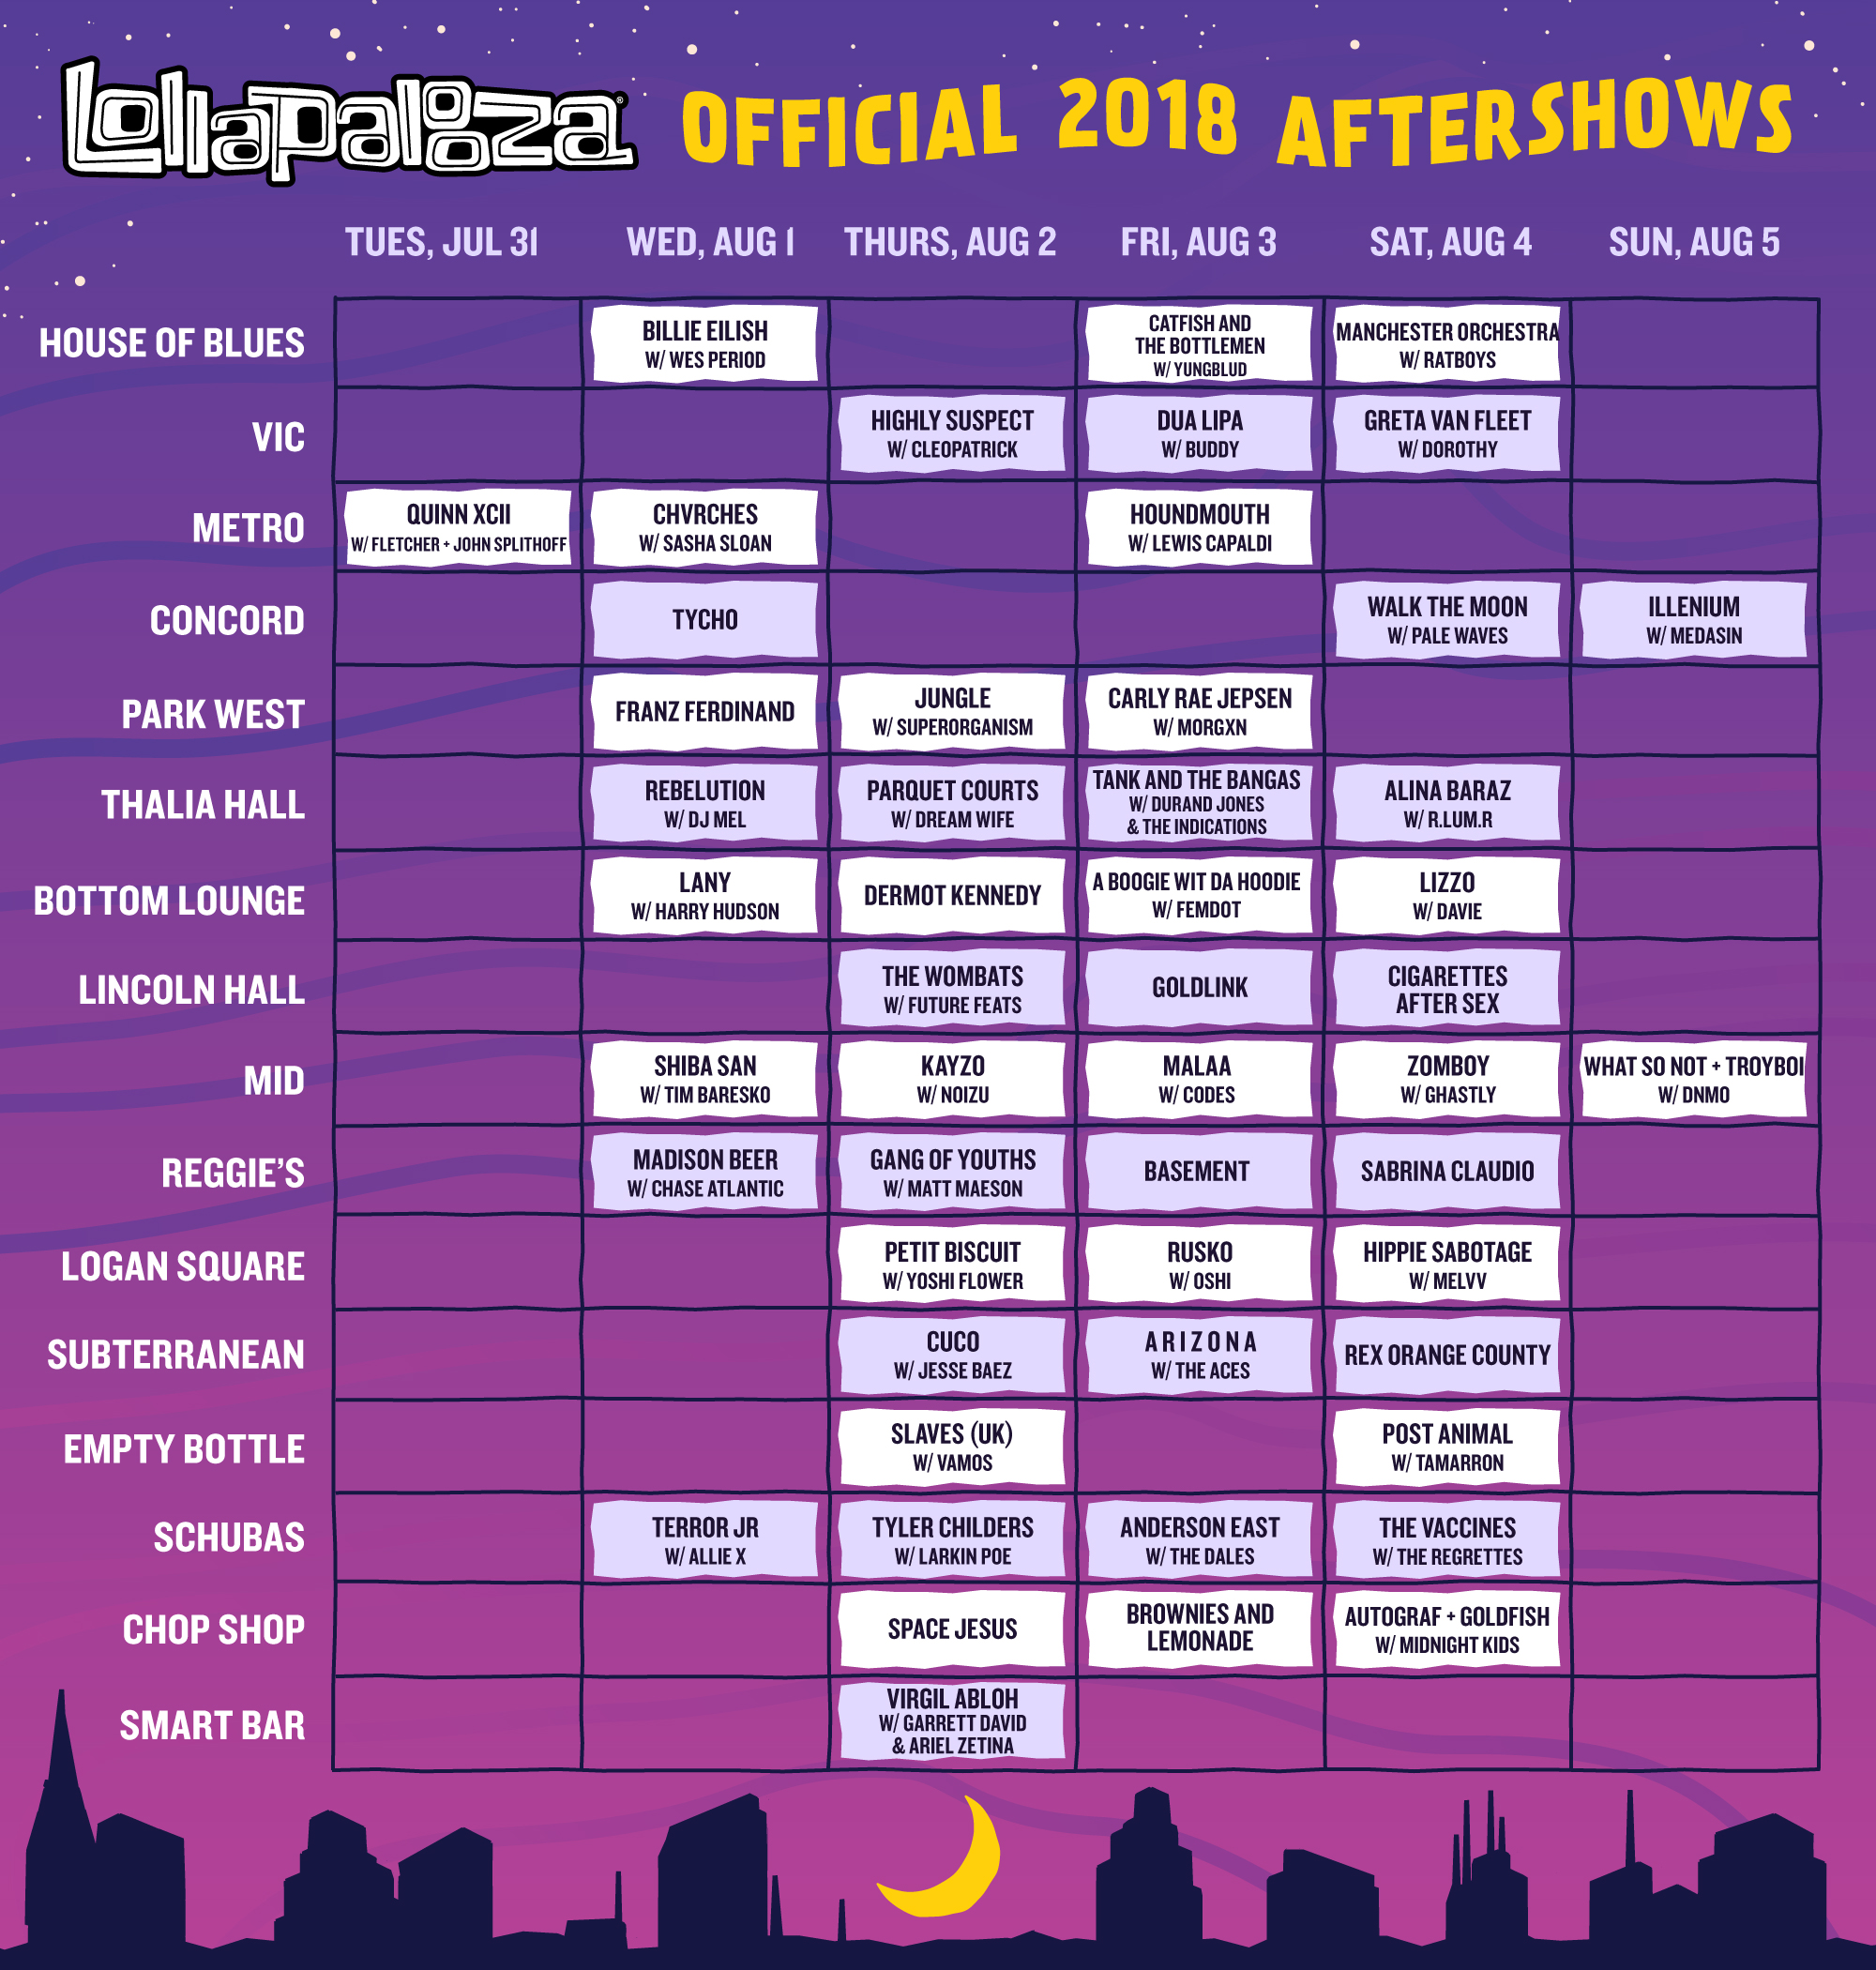 Aftershows table for Lollapalooza 2018